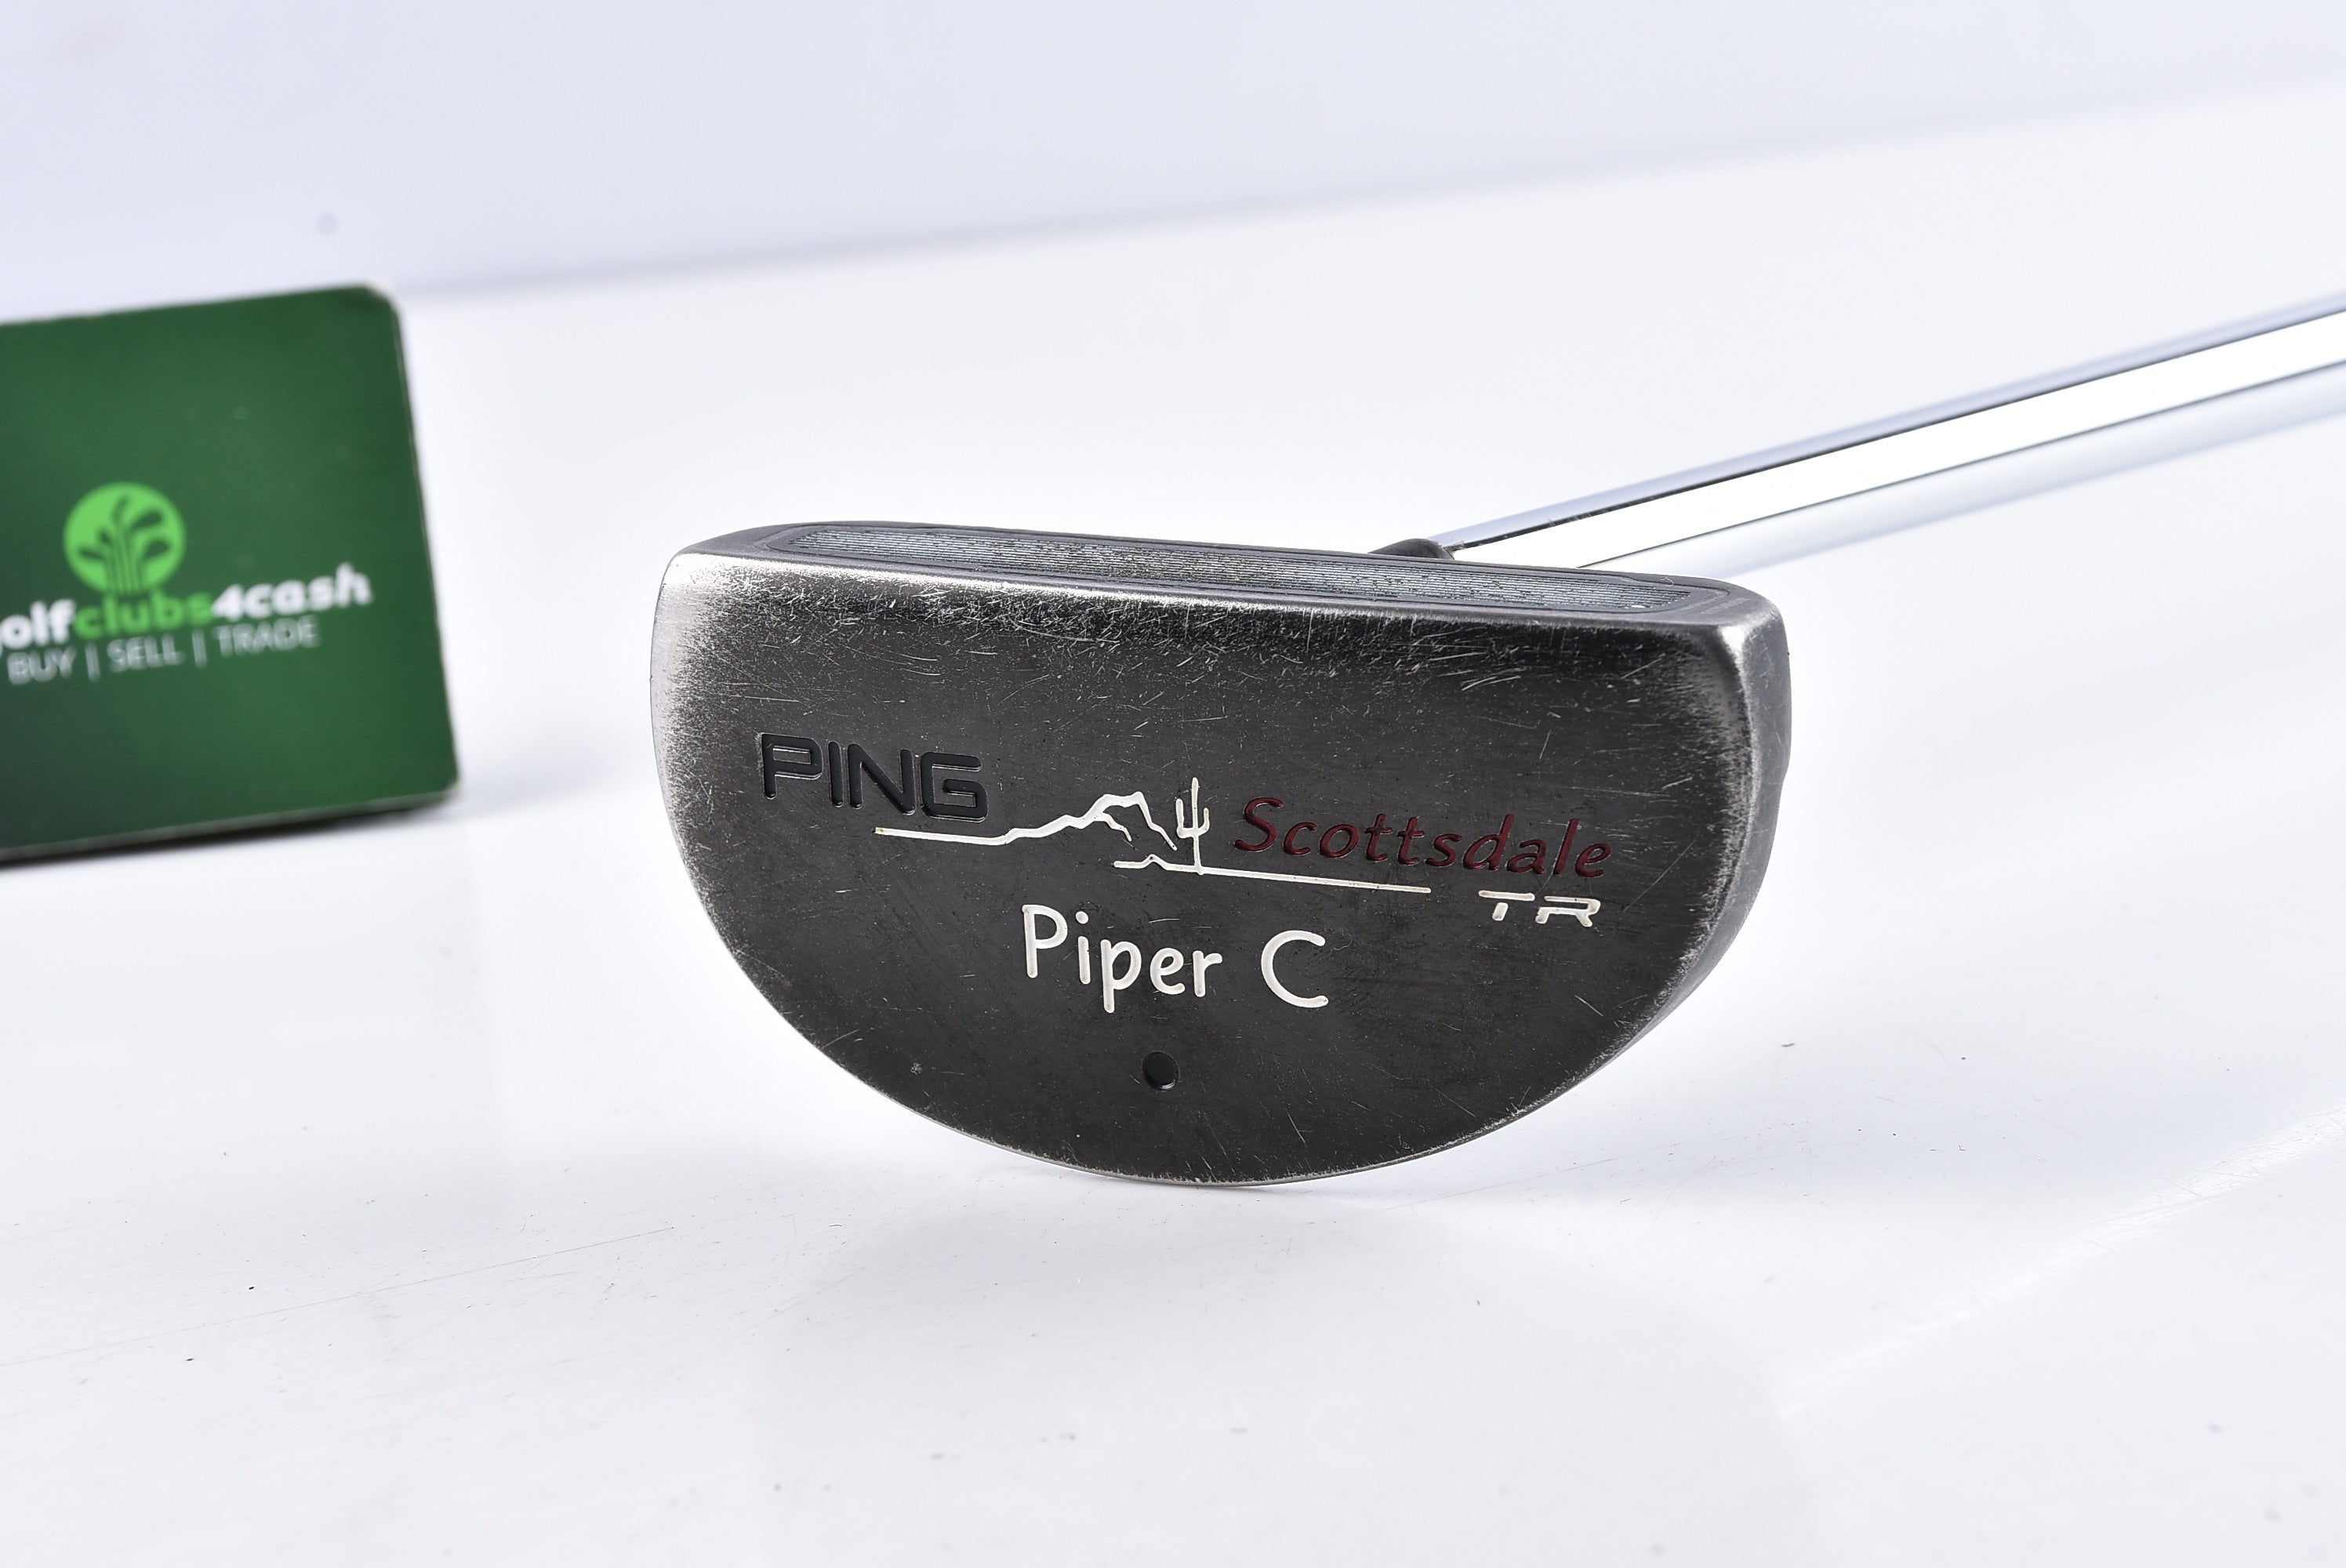 Ping Scottsdale TR Piper C Putter / 32.5 Inch